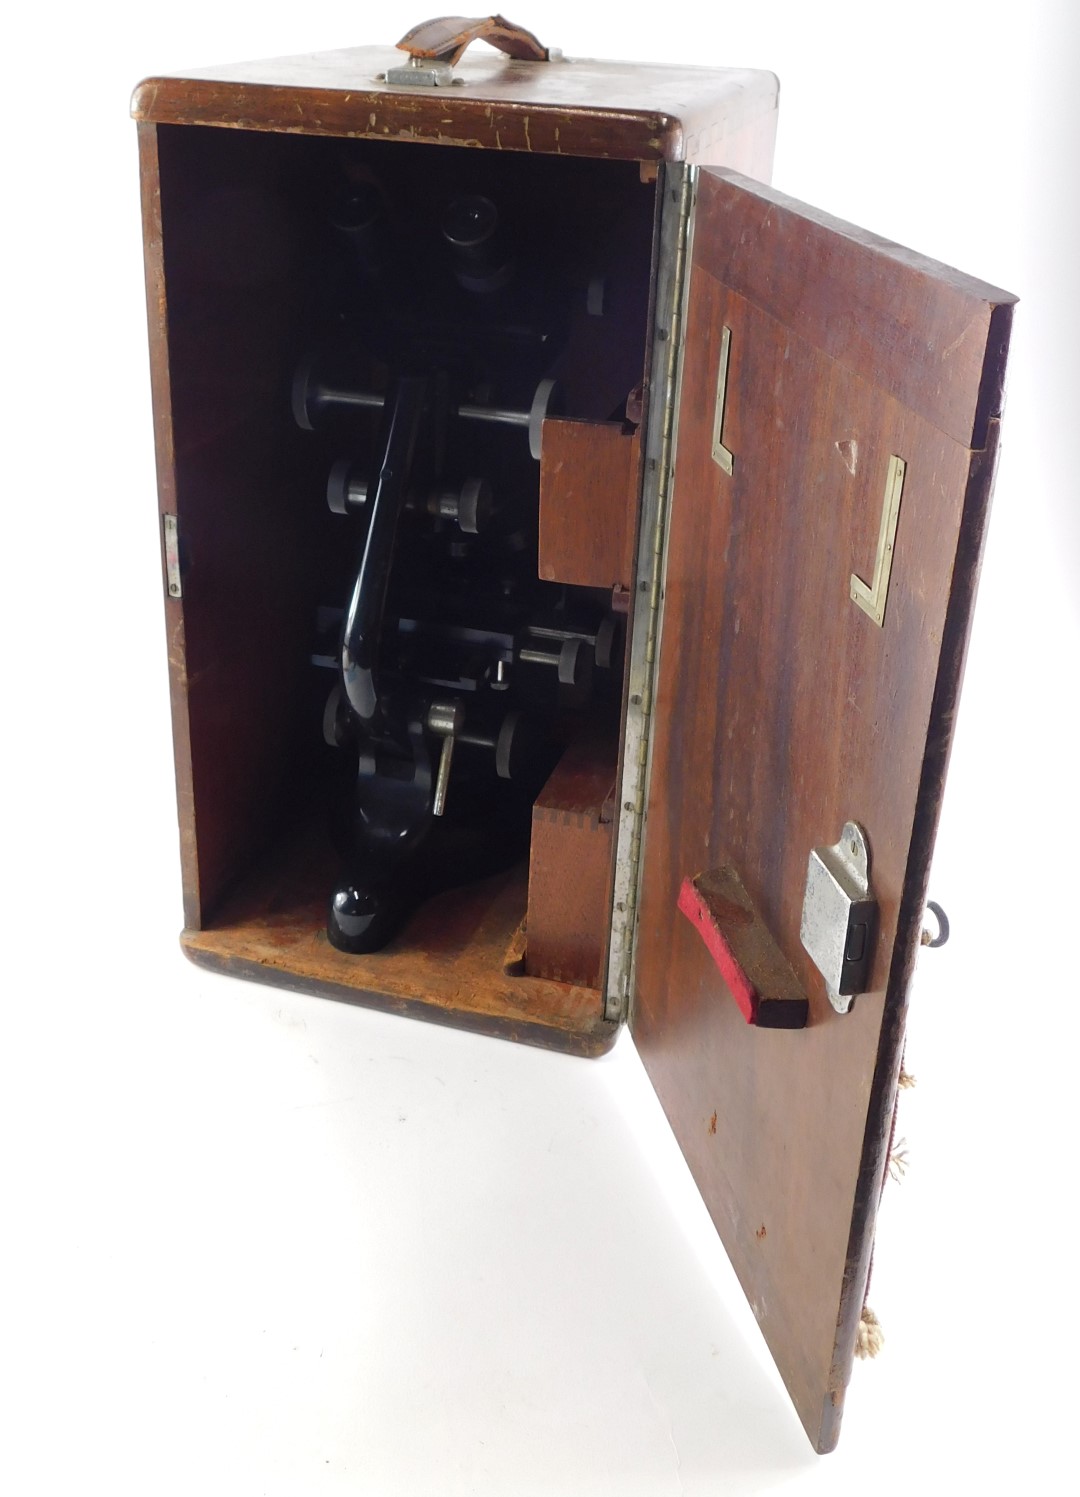 A Watson's binocular microscope, lacking some fittings, in mahogany case, the case 46cm high. - Image 6 of 7